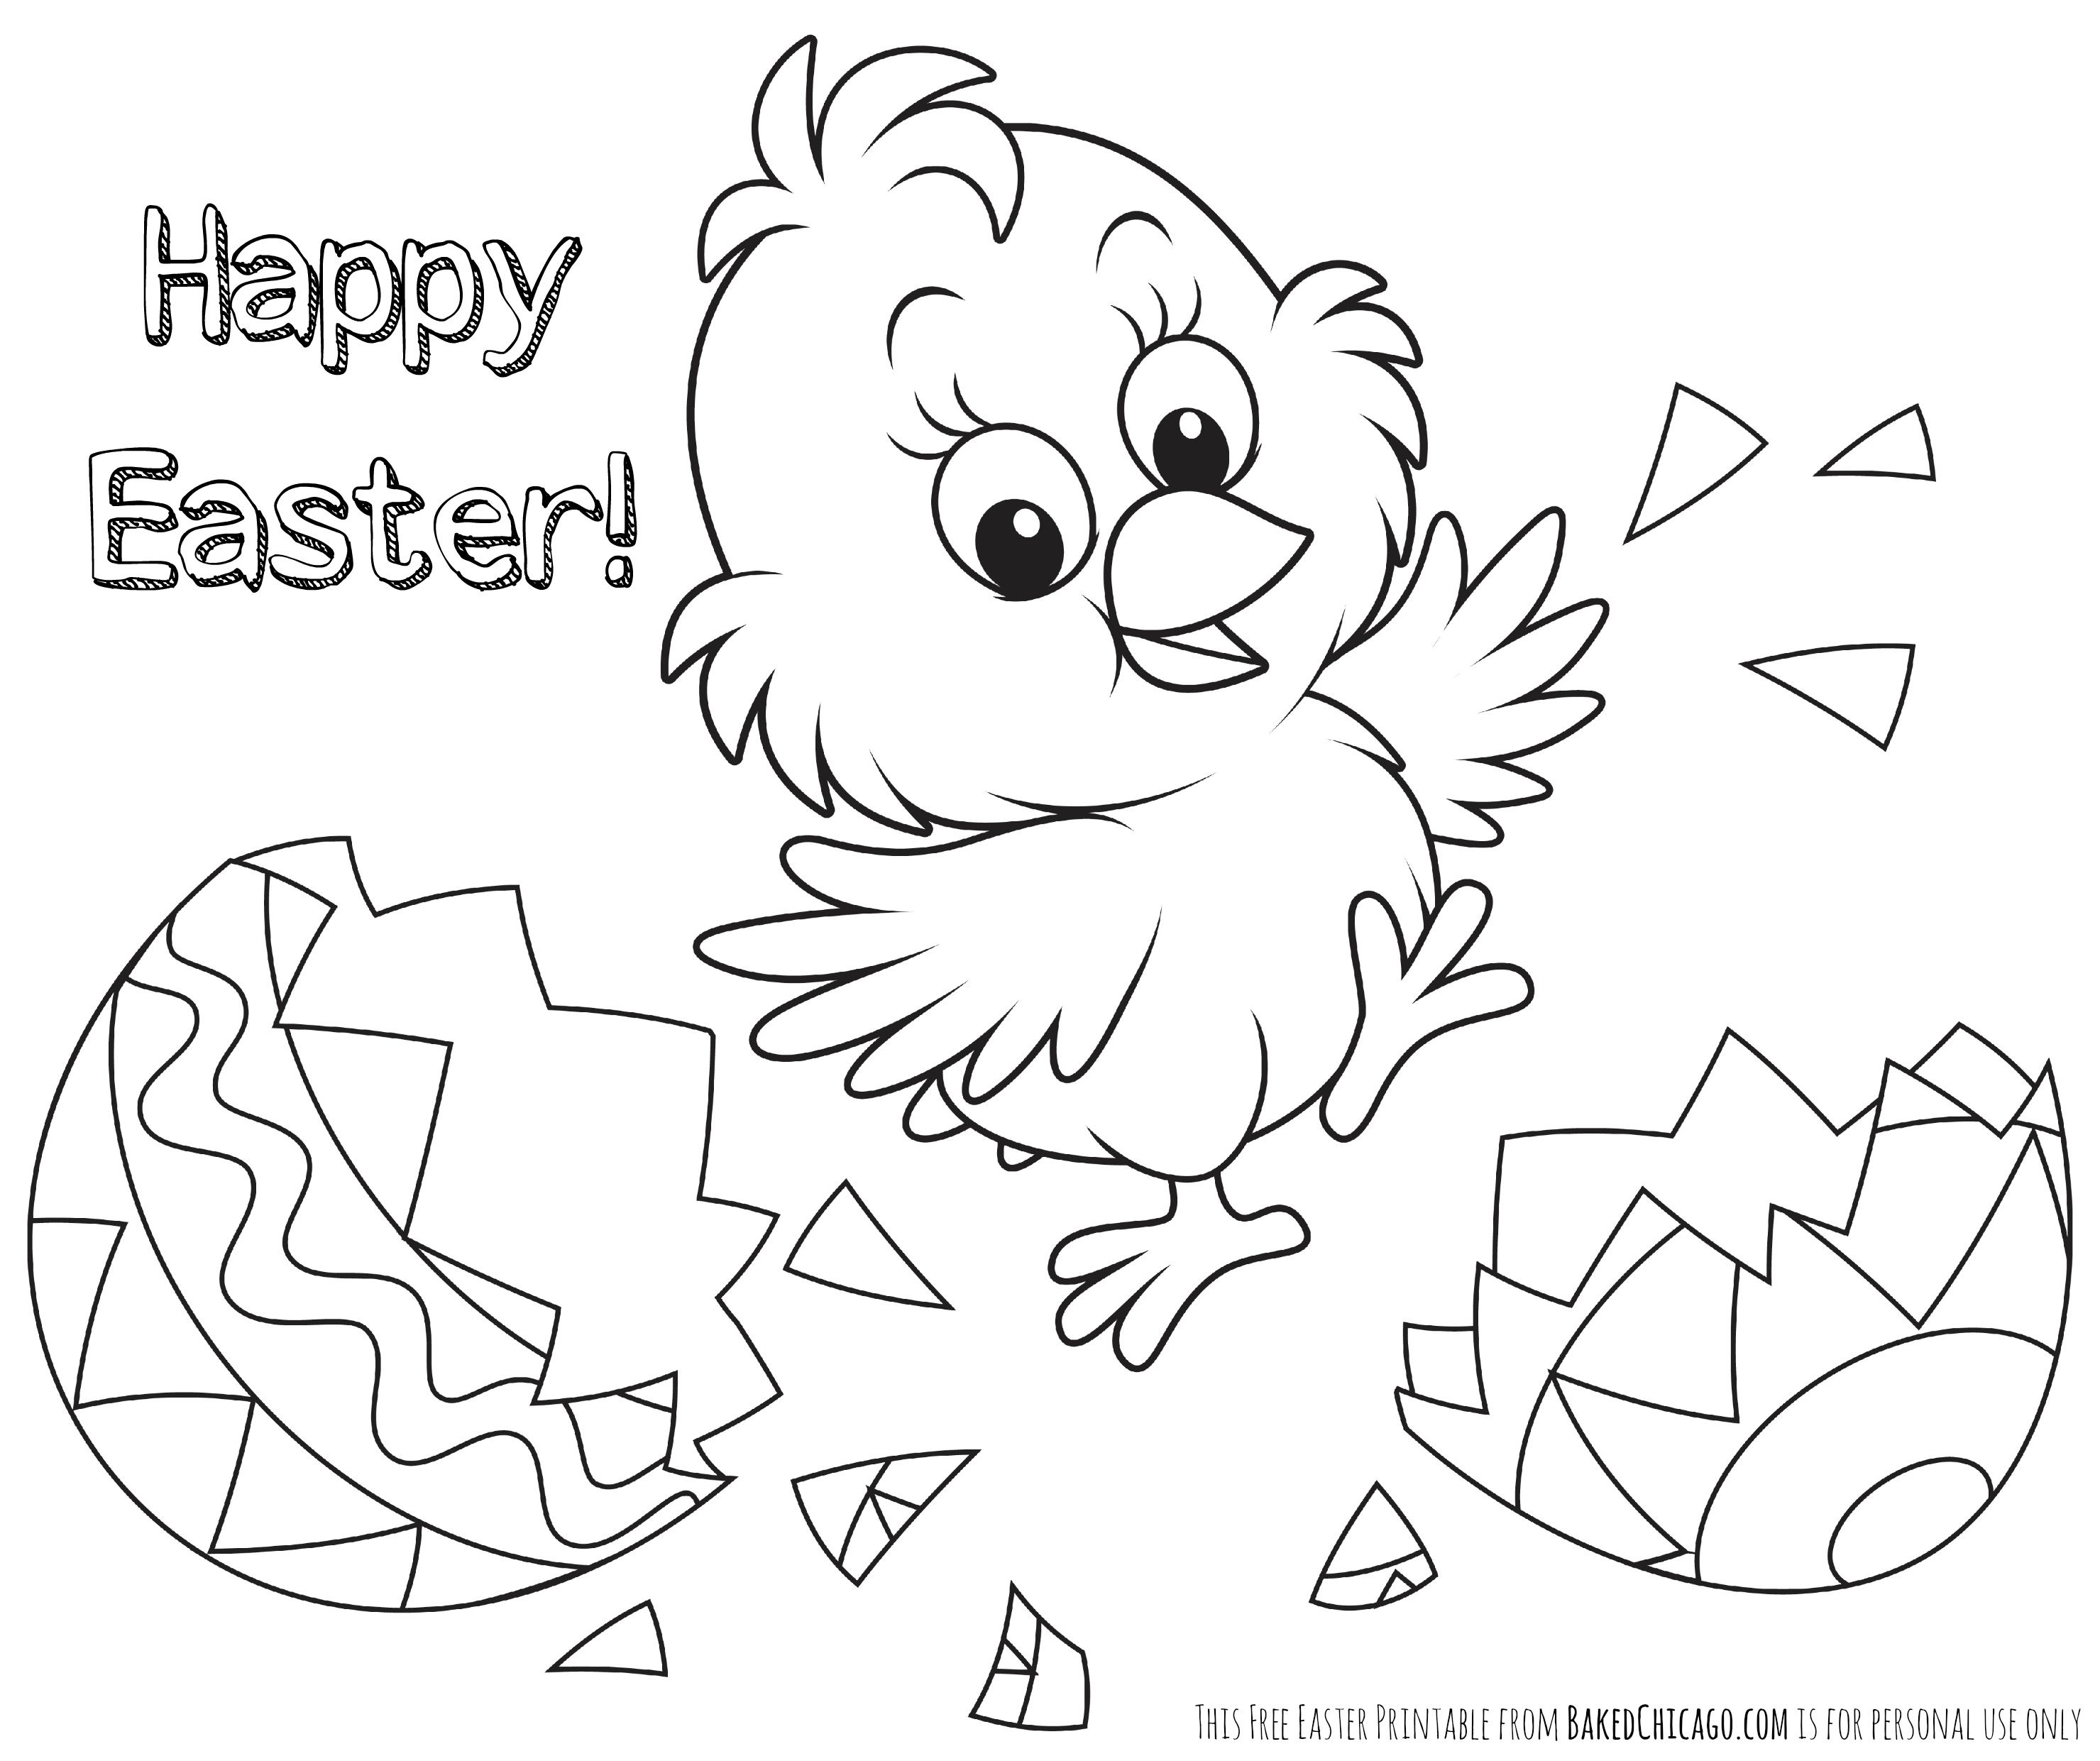 Easter Coloring Pages Printable Bloodbrothers Me Colouring Sheets - Free Printable Easter Pages